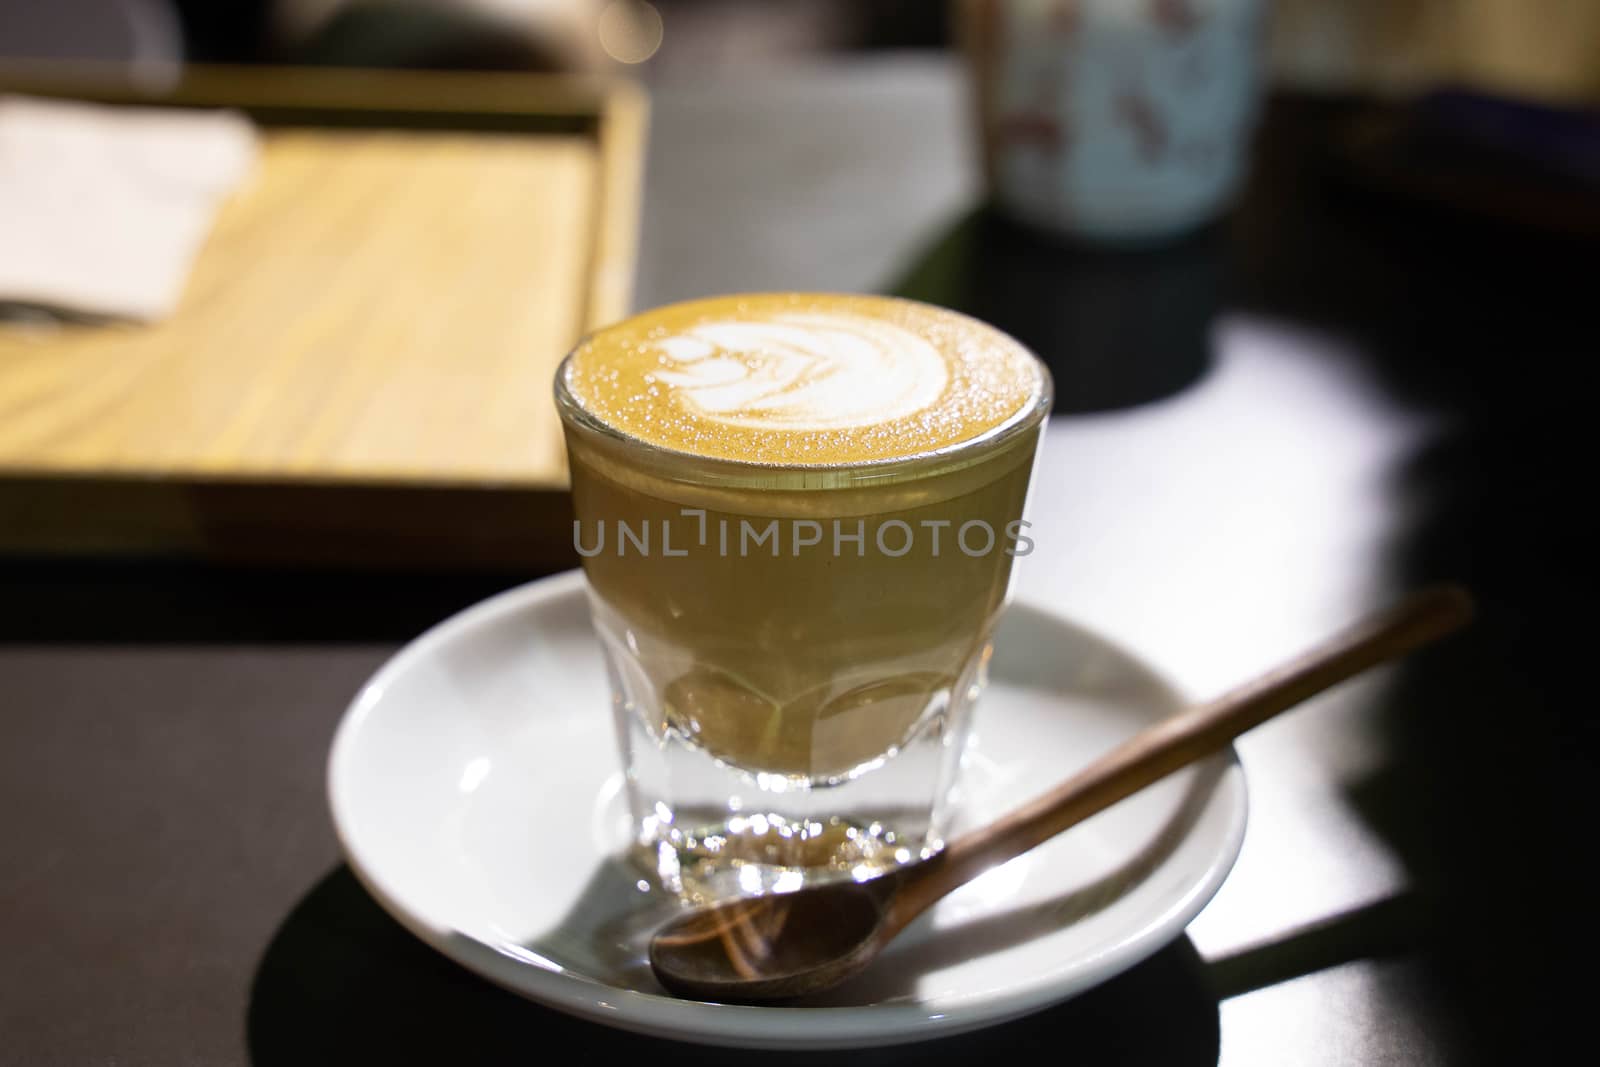 Spoon and cup of coffee on table by uphotopia